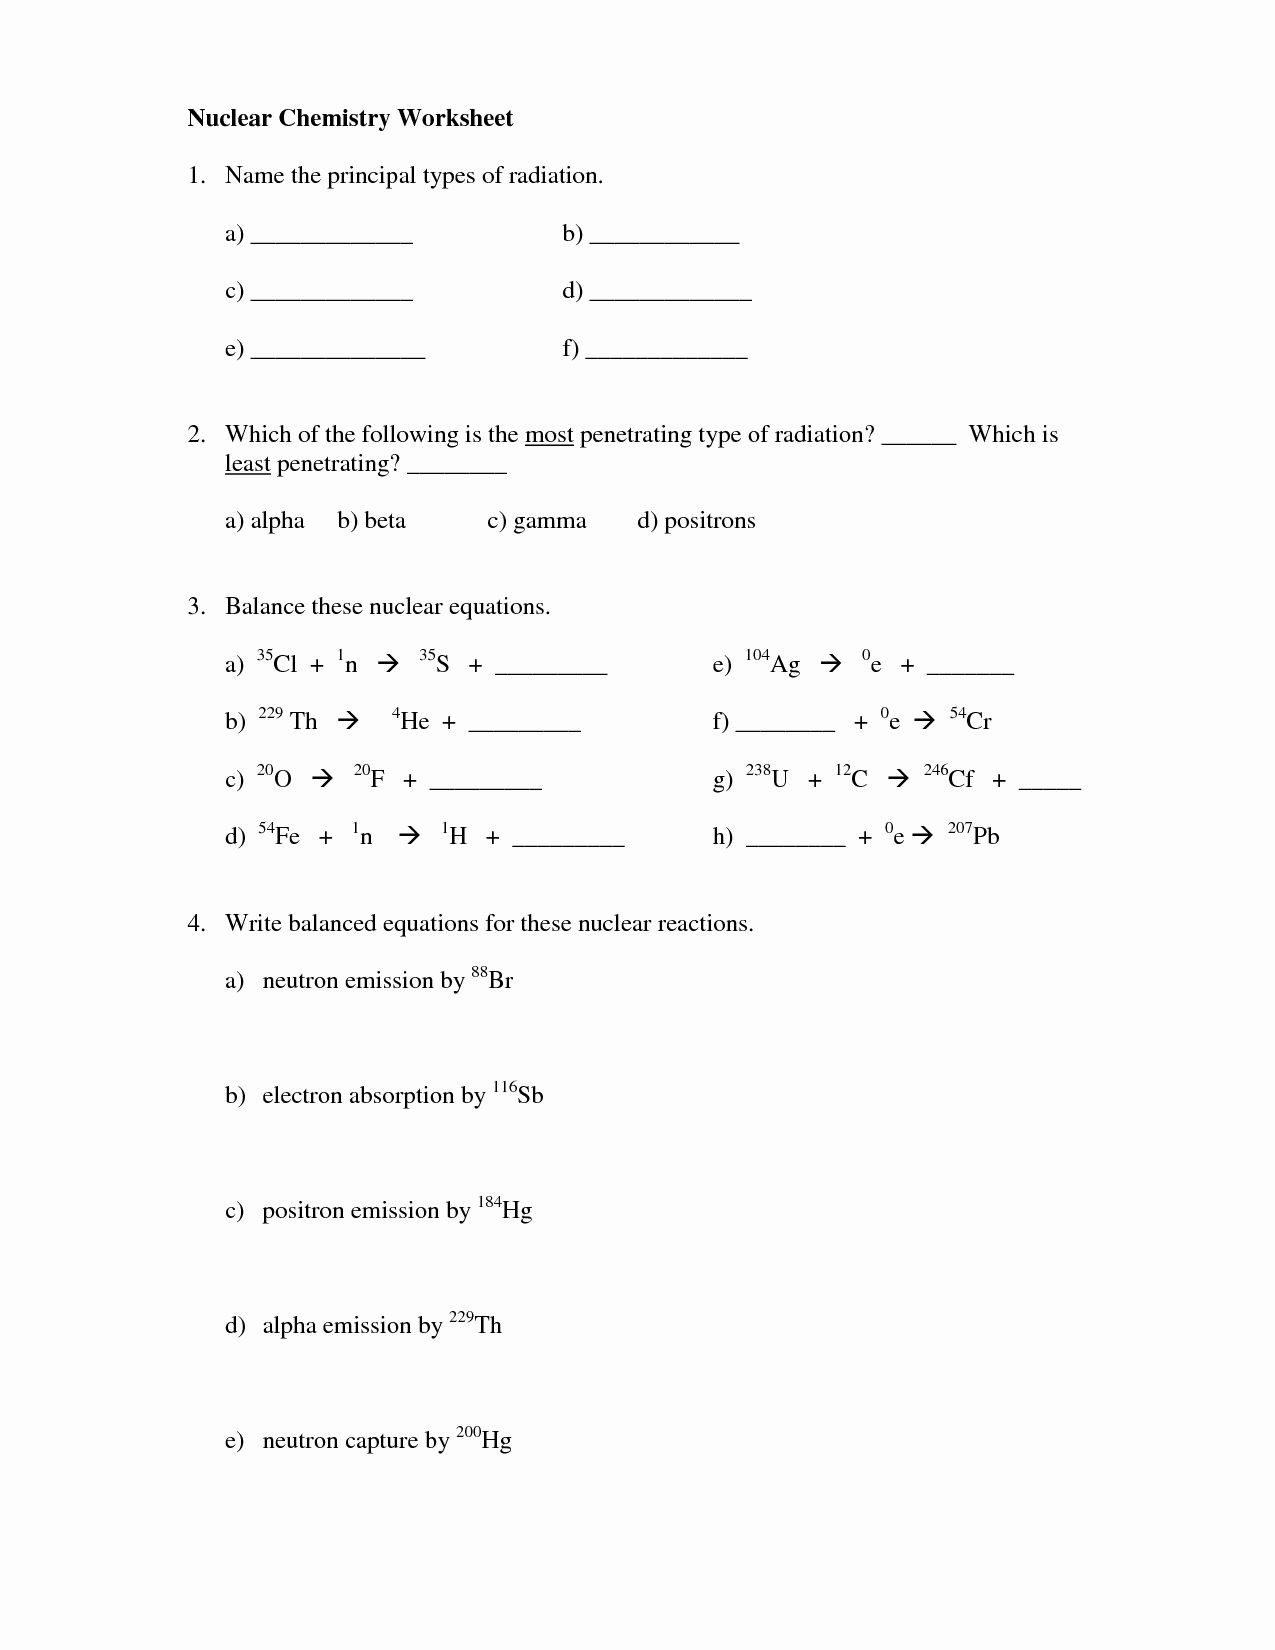 Nuclear Decay Worksheet Answers Key 50 Nuclear Decay Worksheet Answers Key In 2020 with Images